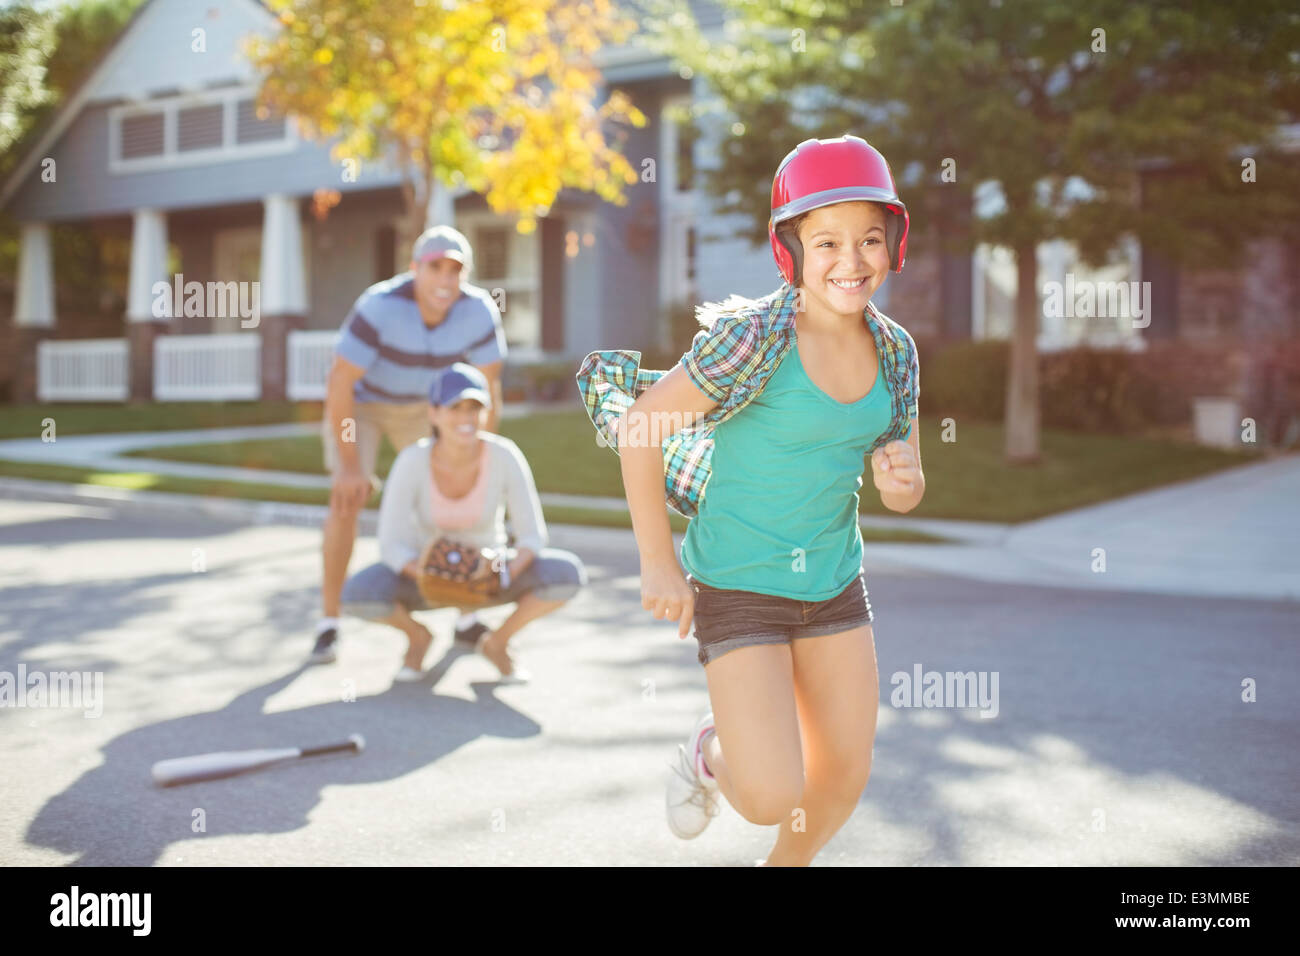 Family playing baseball in street Stock Photo